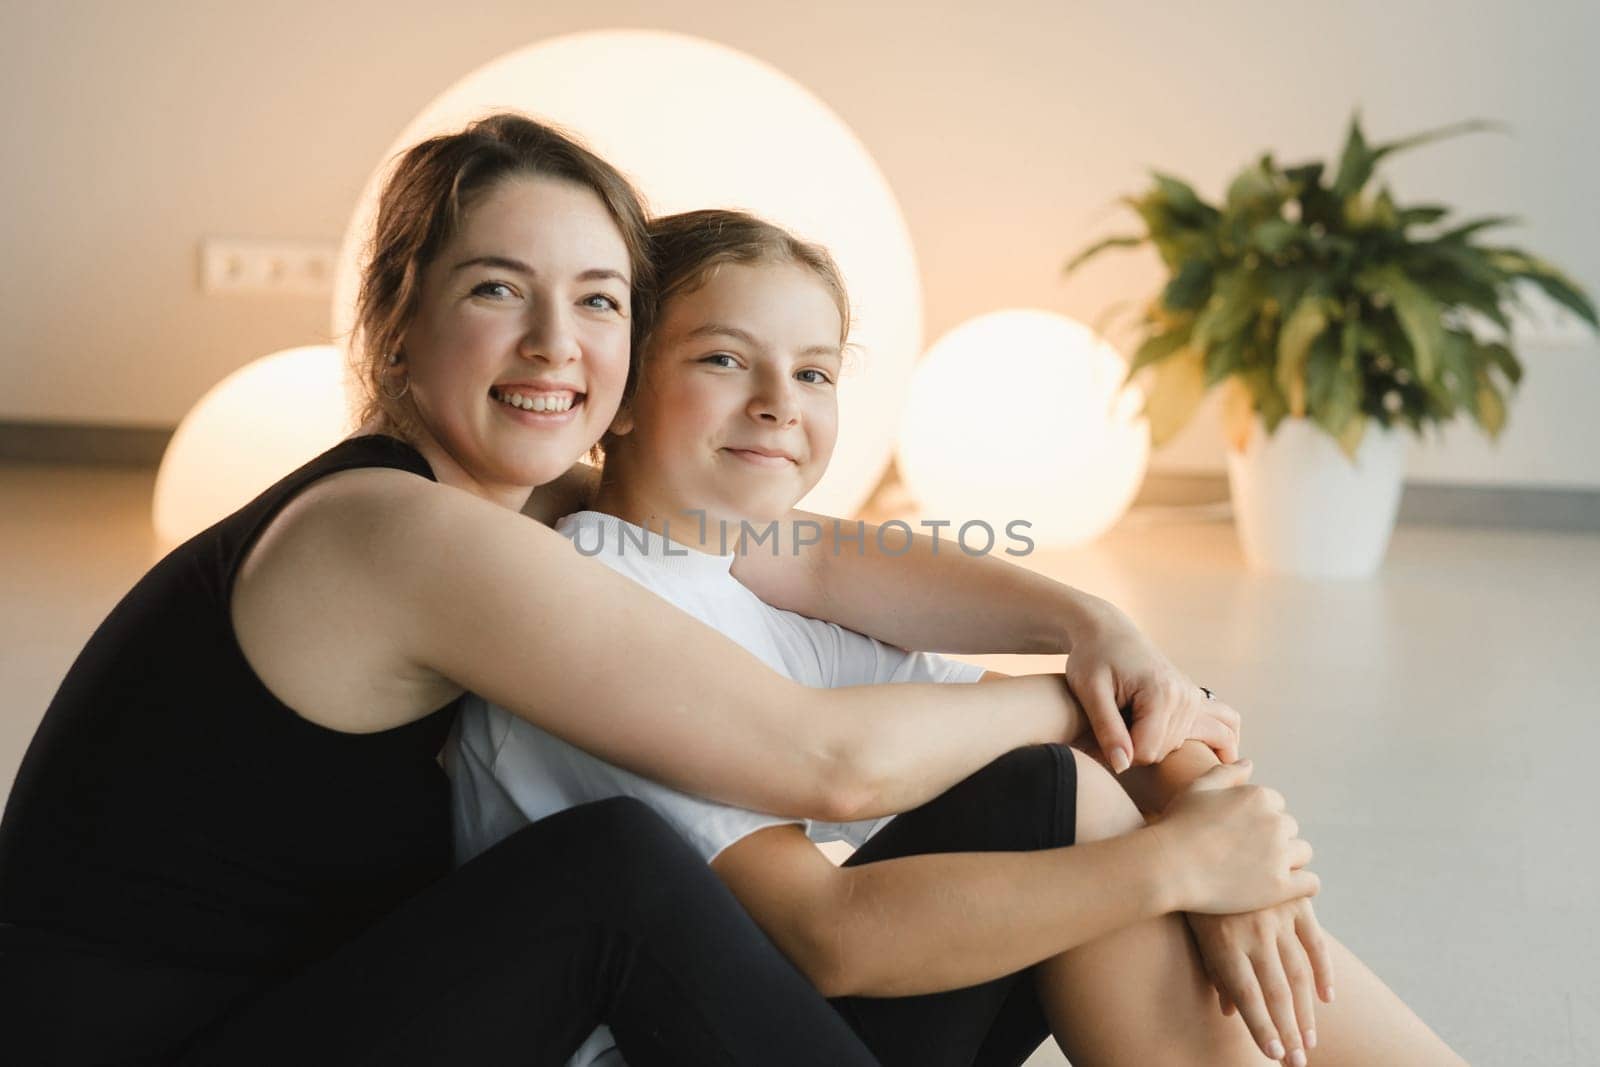 portrait of a mother and daughter of a teenager in sports clothes hugging, who are together in a fitness room. the concept of family sports.